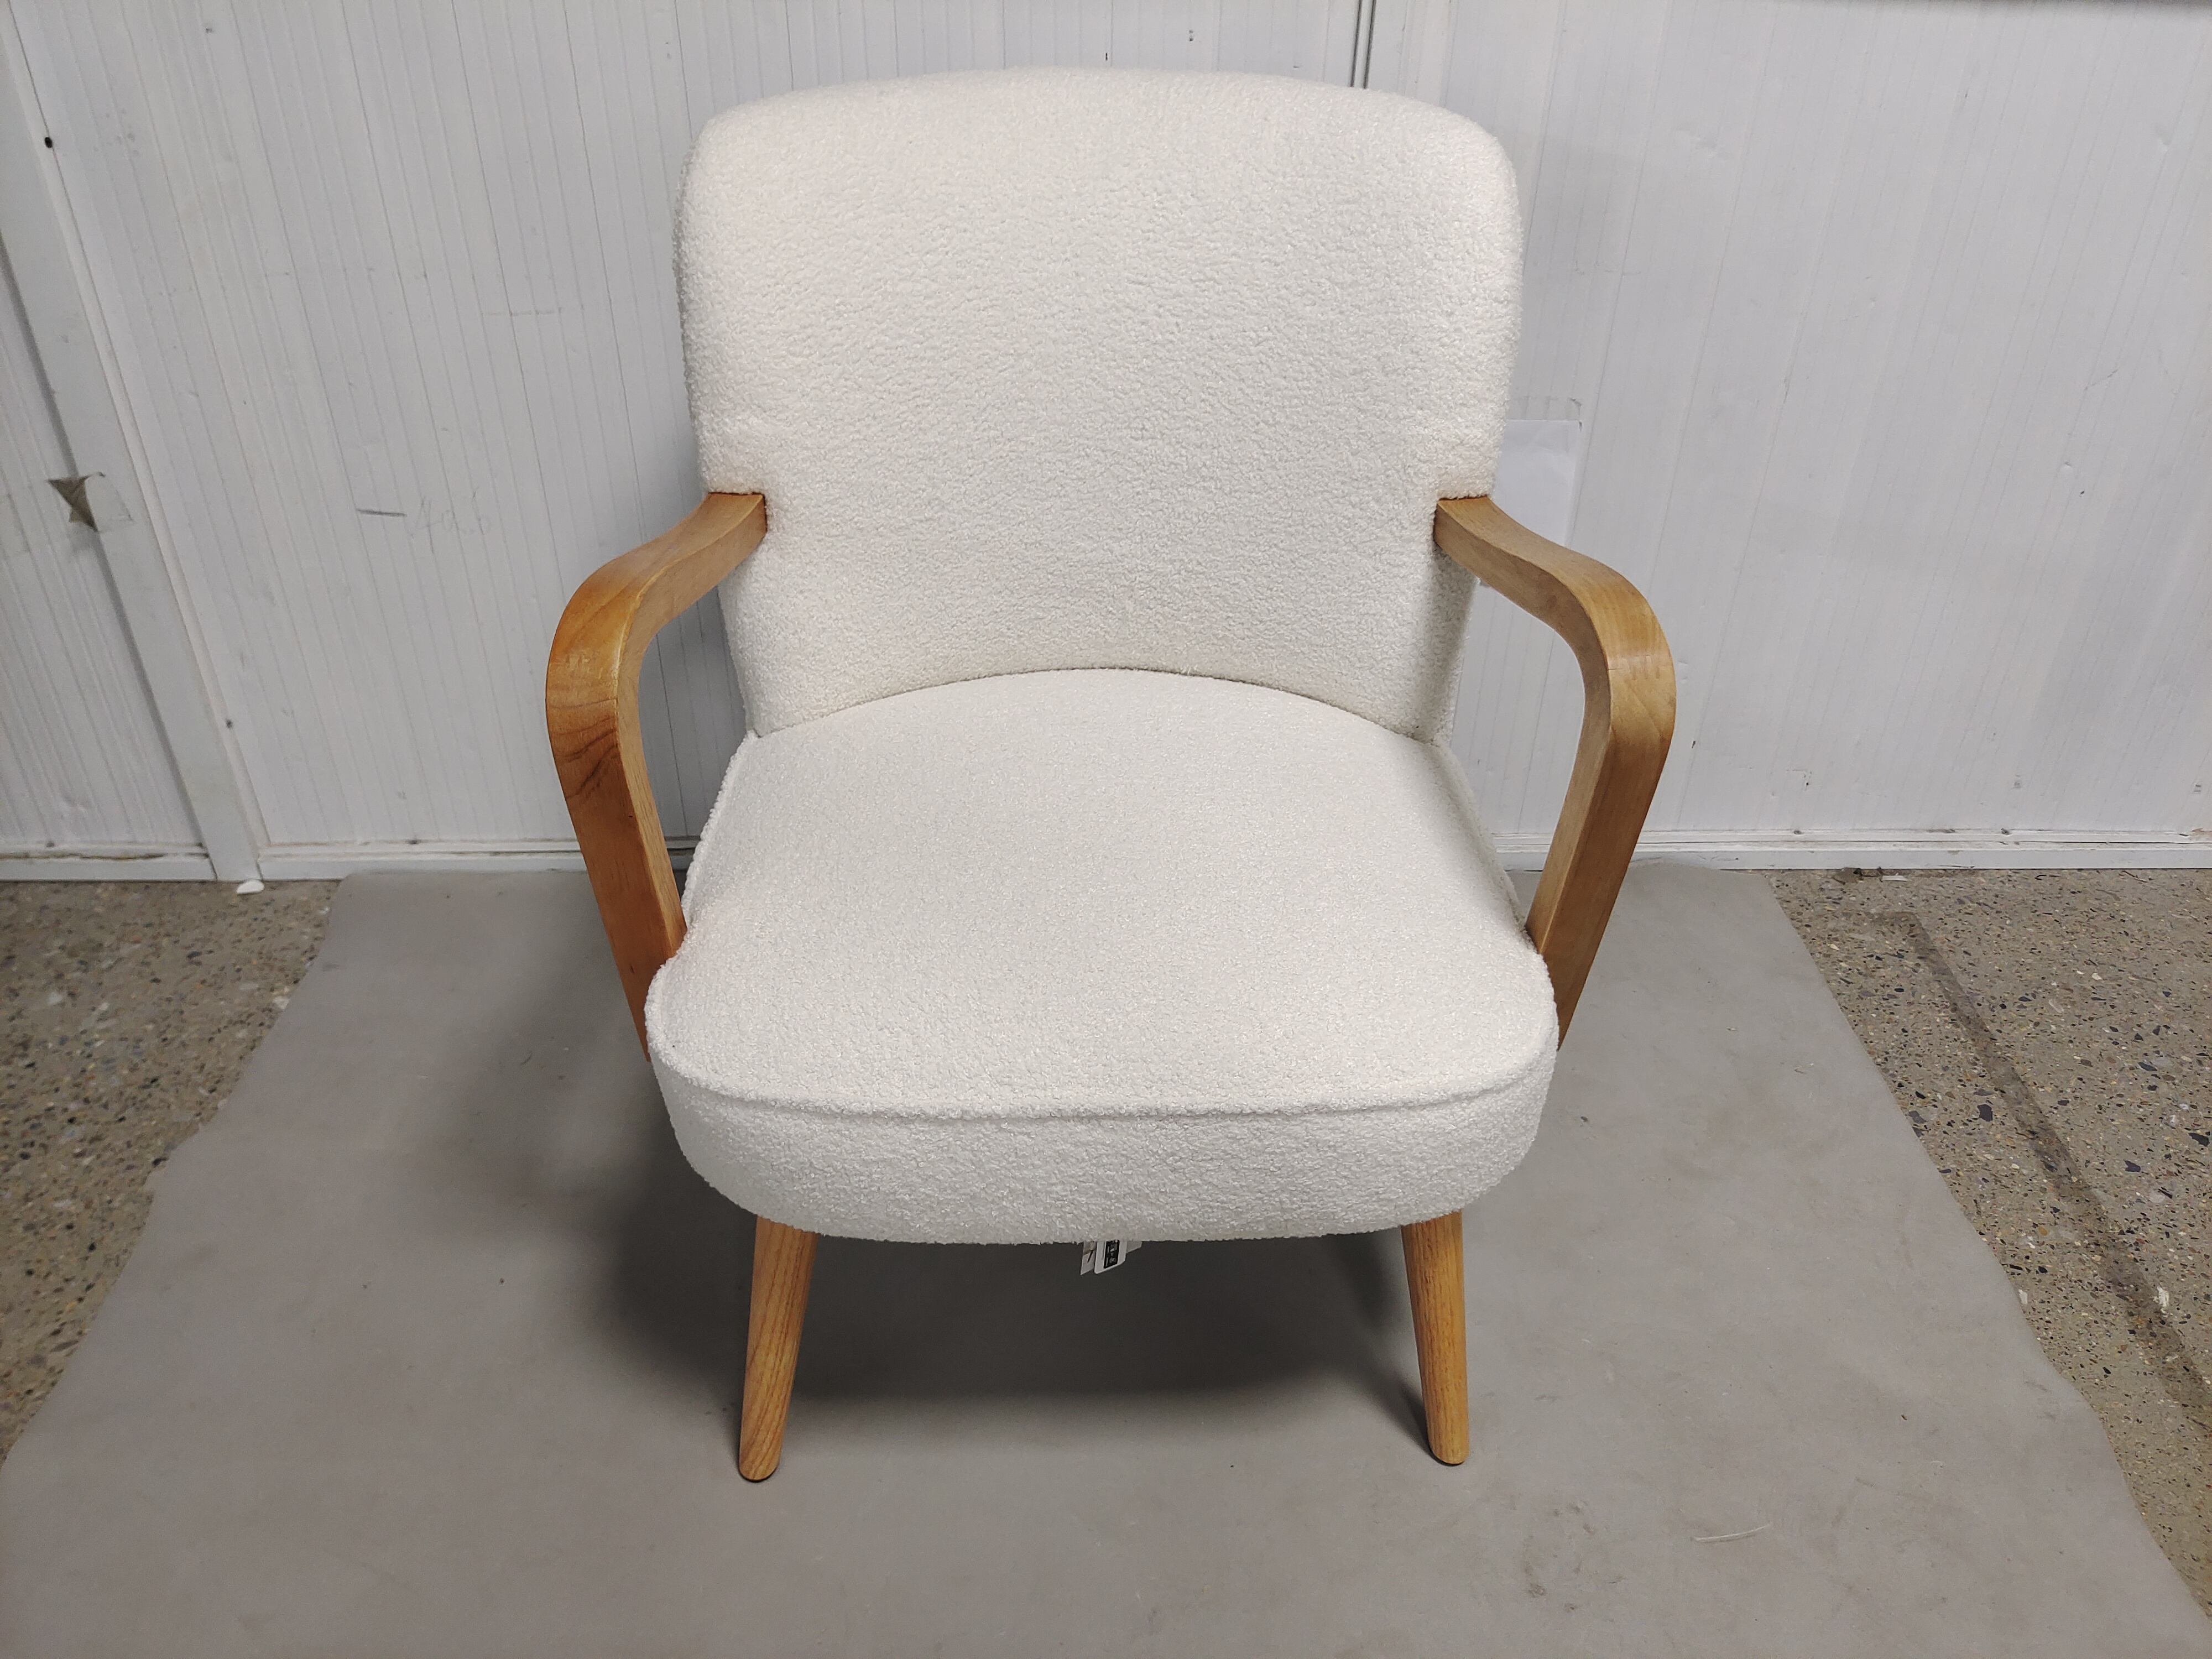 Upholstered chair back chair inspection third party inspection home testing Yongshun national third party testing inspection